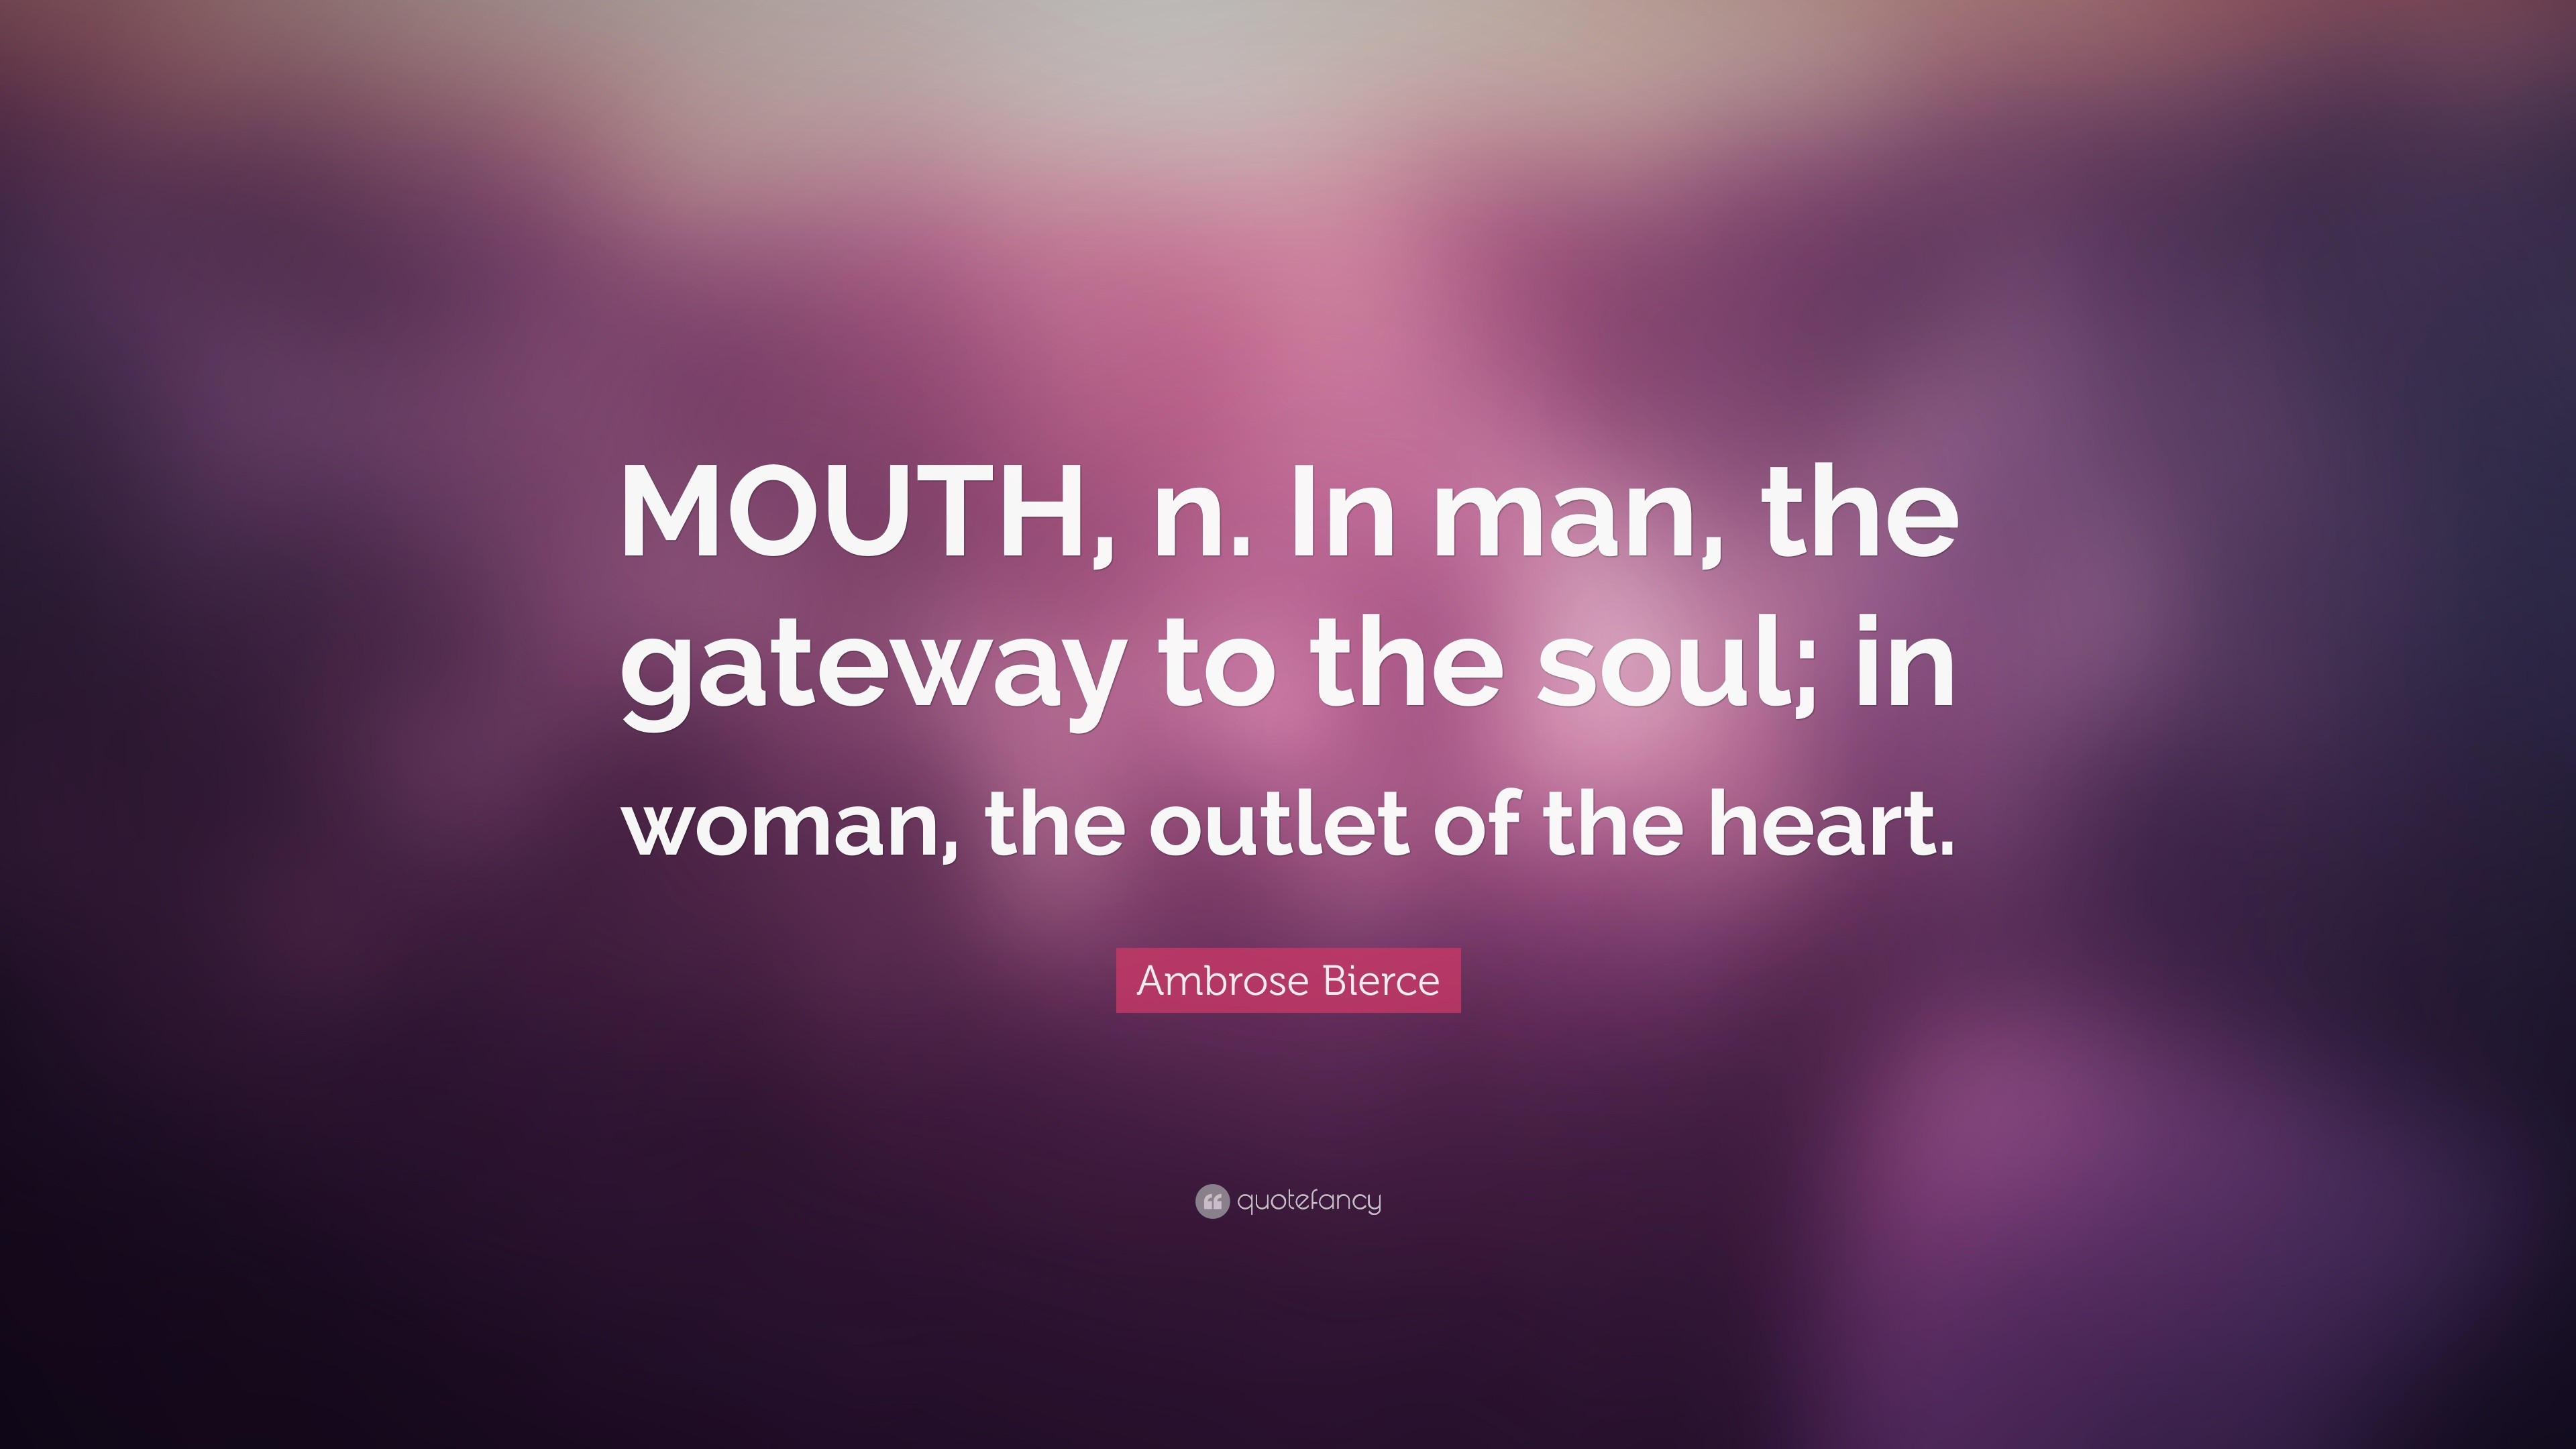 3840x2160 7 wallpapers. Ambrose Bierce Quote: “MOUTH, n. In man, the gateway to the